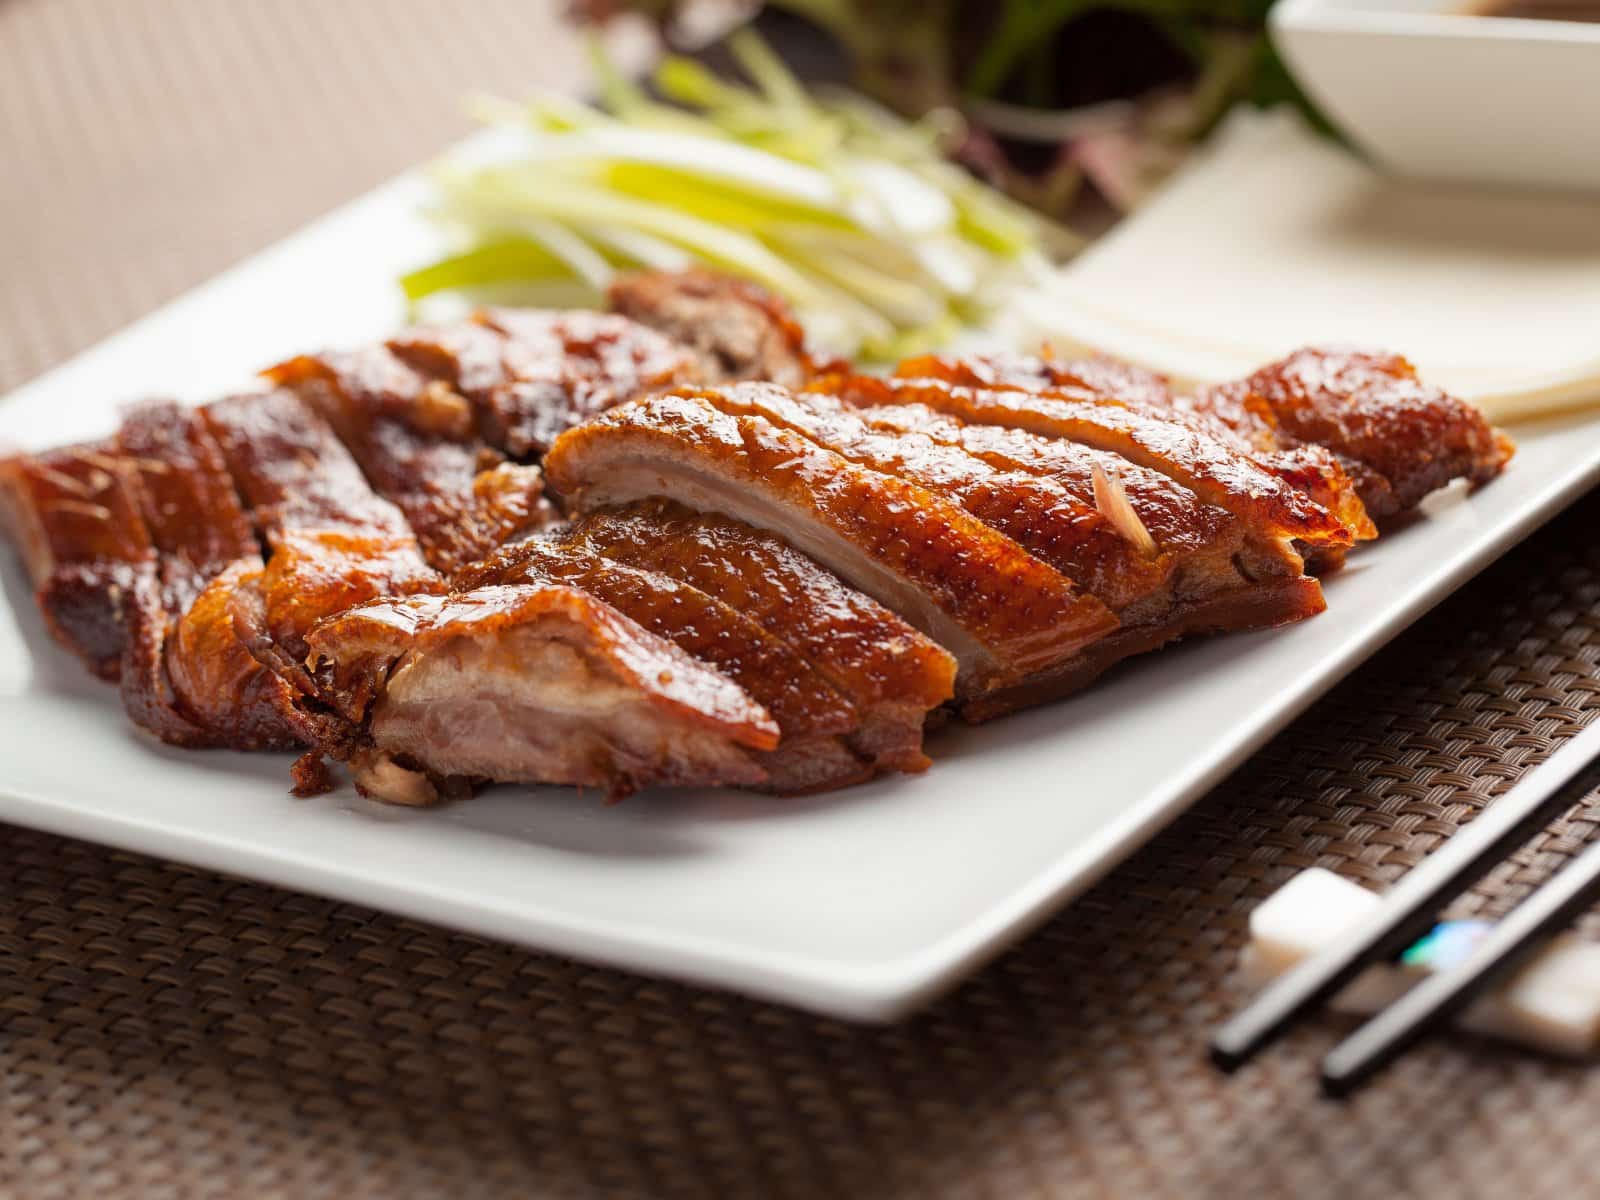 Image Credit: Shutterstock / BBstockimage <p><span>Crispy skin, succulent meat, and a rich history make Peking Duck a must-try. Served with pancakes, scallions, and hoisin sauce, it’s a dish fit for emperors.</span></p>